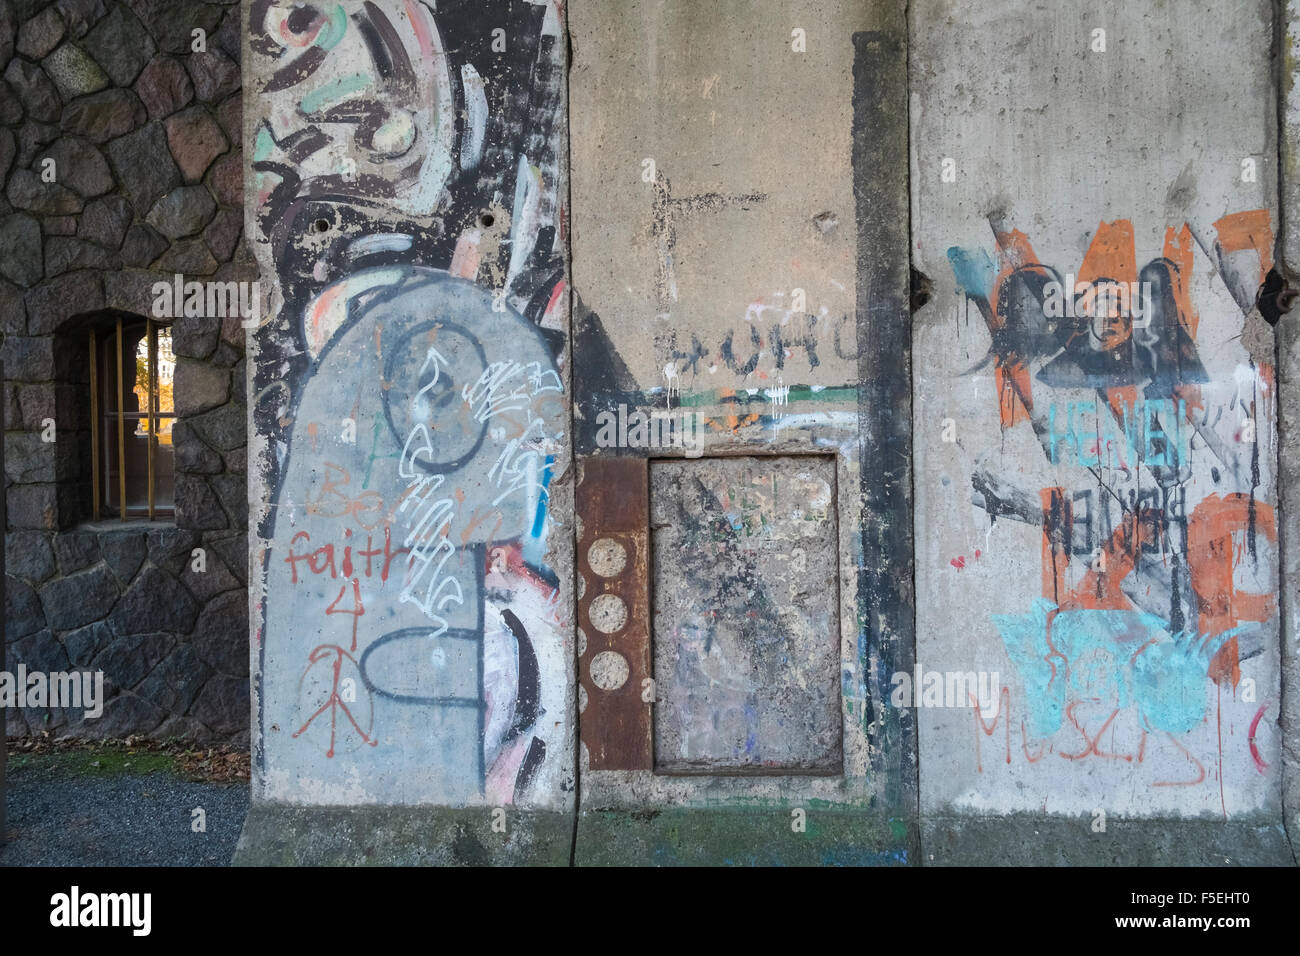 Segments of the original Berlin Wall on display outside the Märkisches (Marcher) Museum, Mitte, Berlin, Germany, Europe Stock Photo